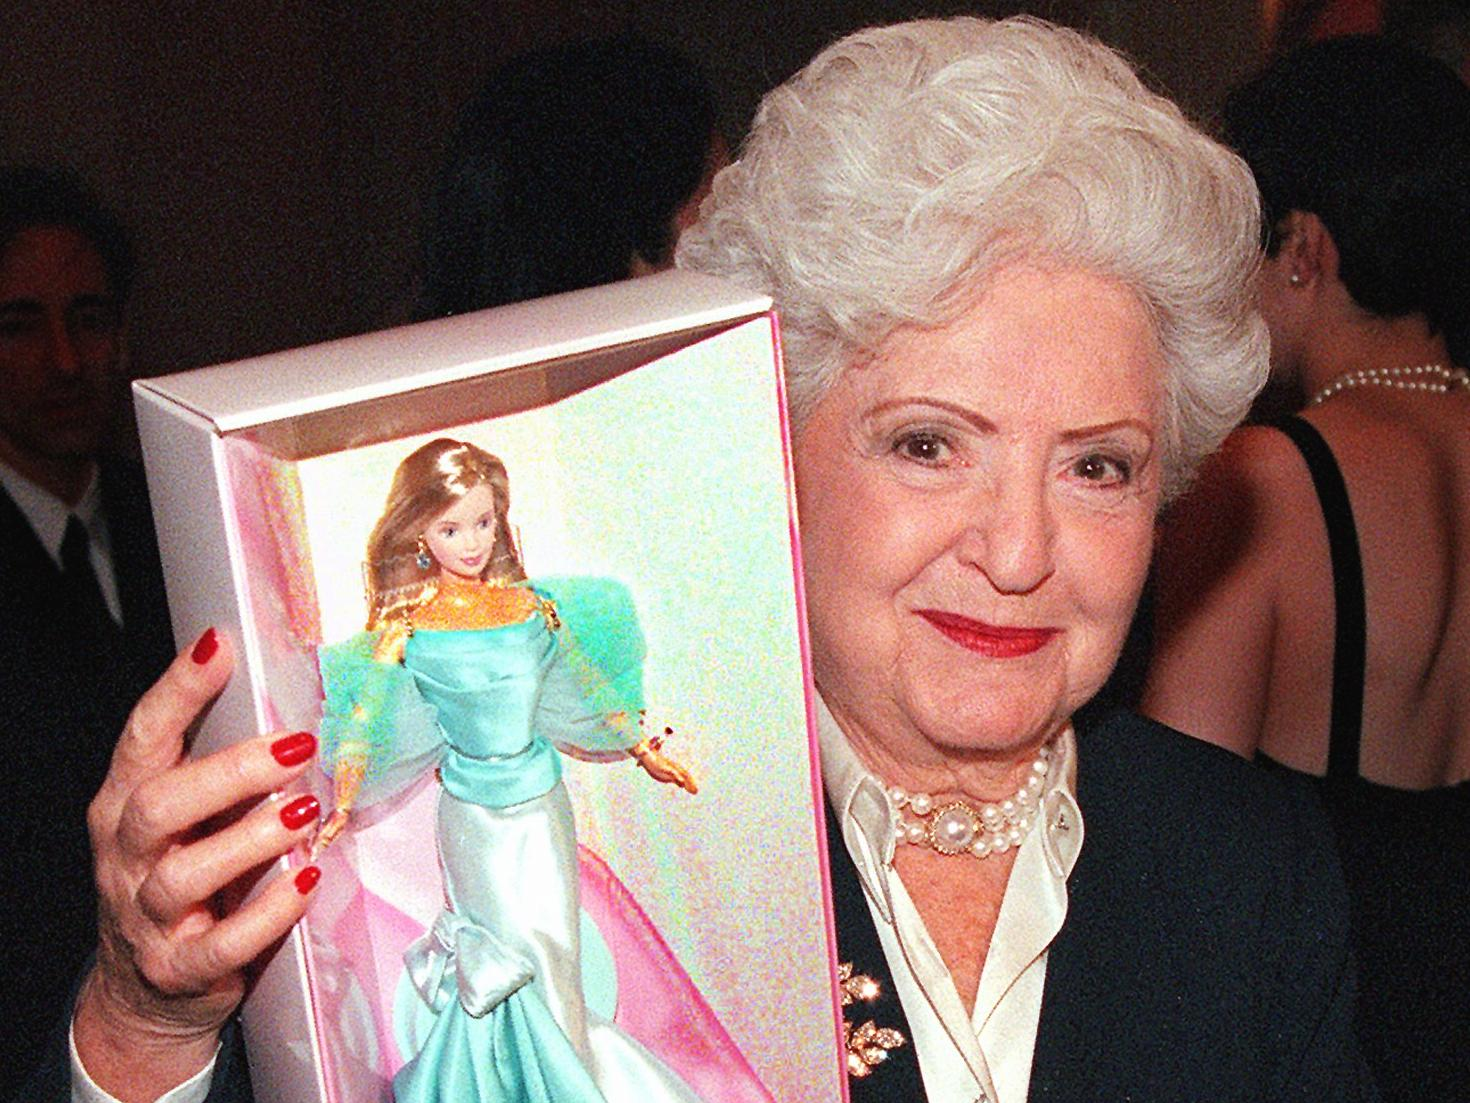 Ruth Handler, inventor of Barbies, holds a Barbie doll